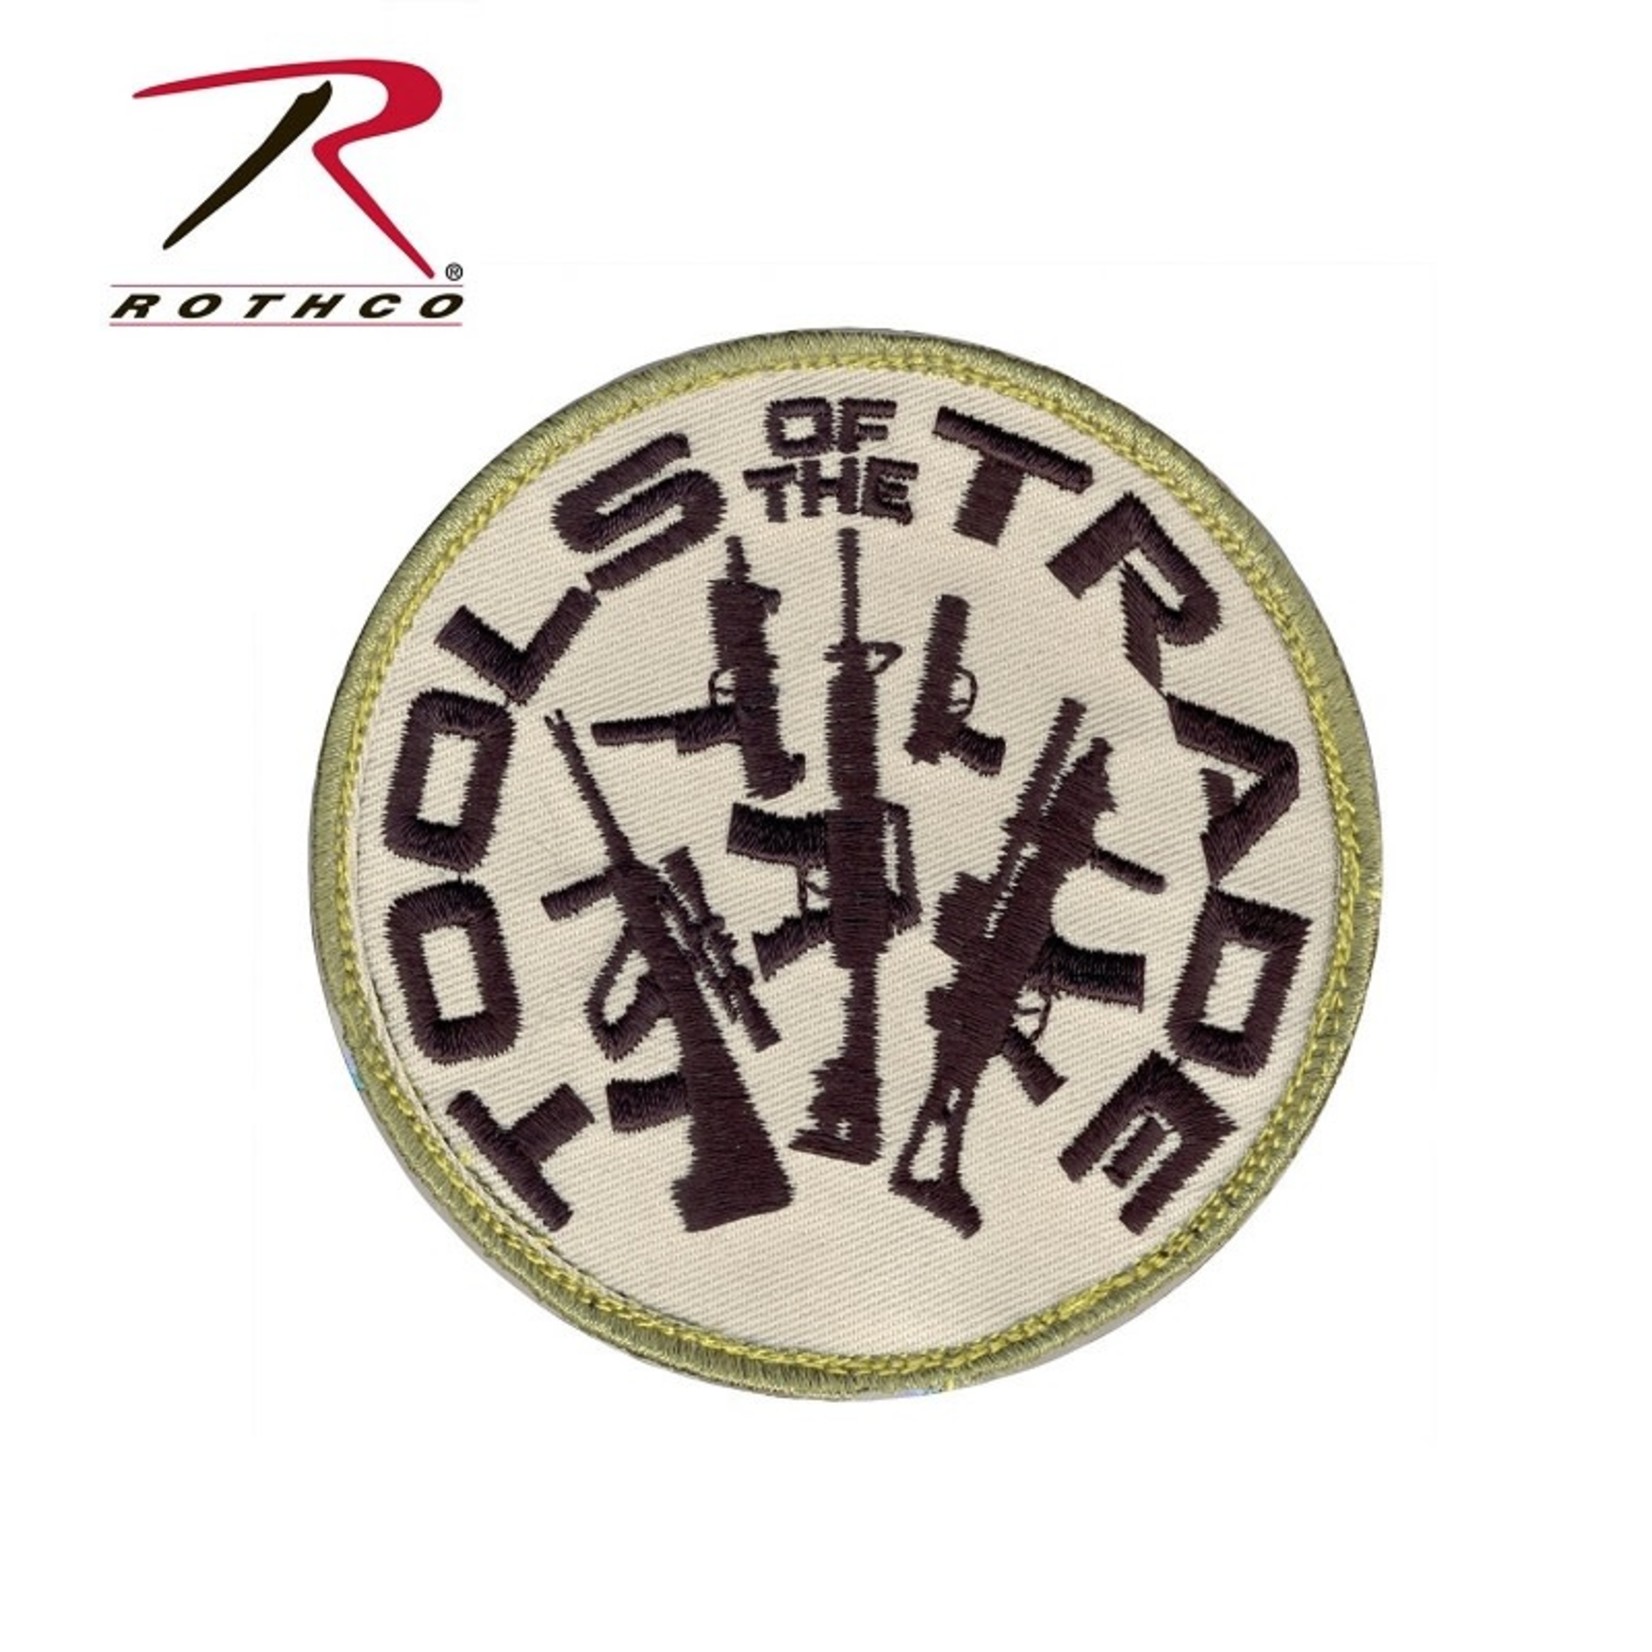 Rothco Rothco Tools Of The Trade Morale Patch